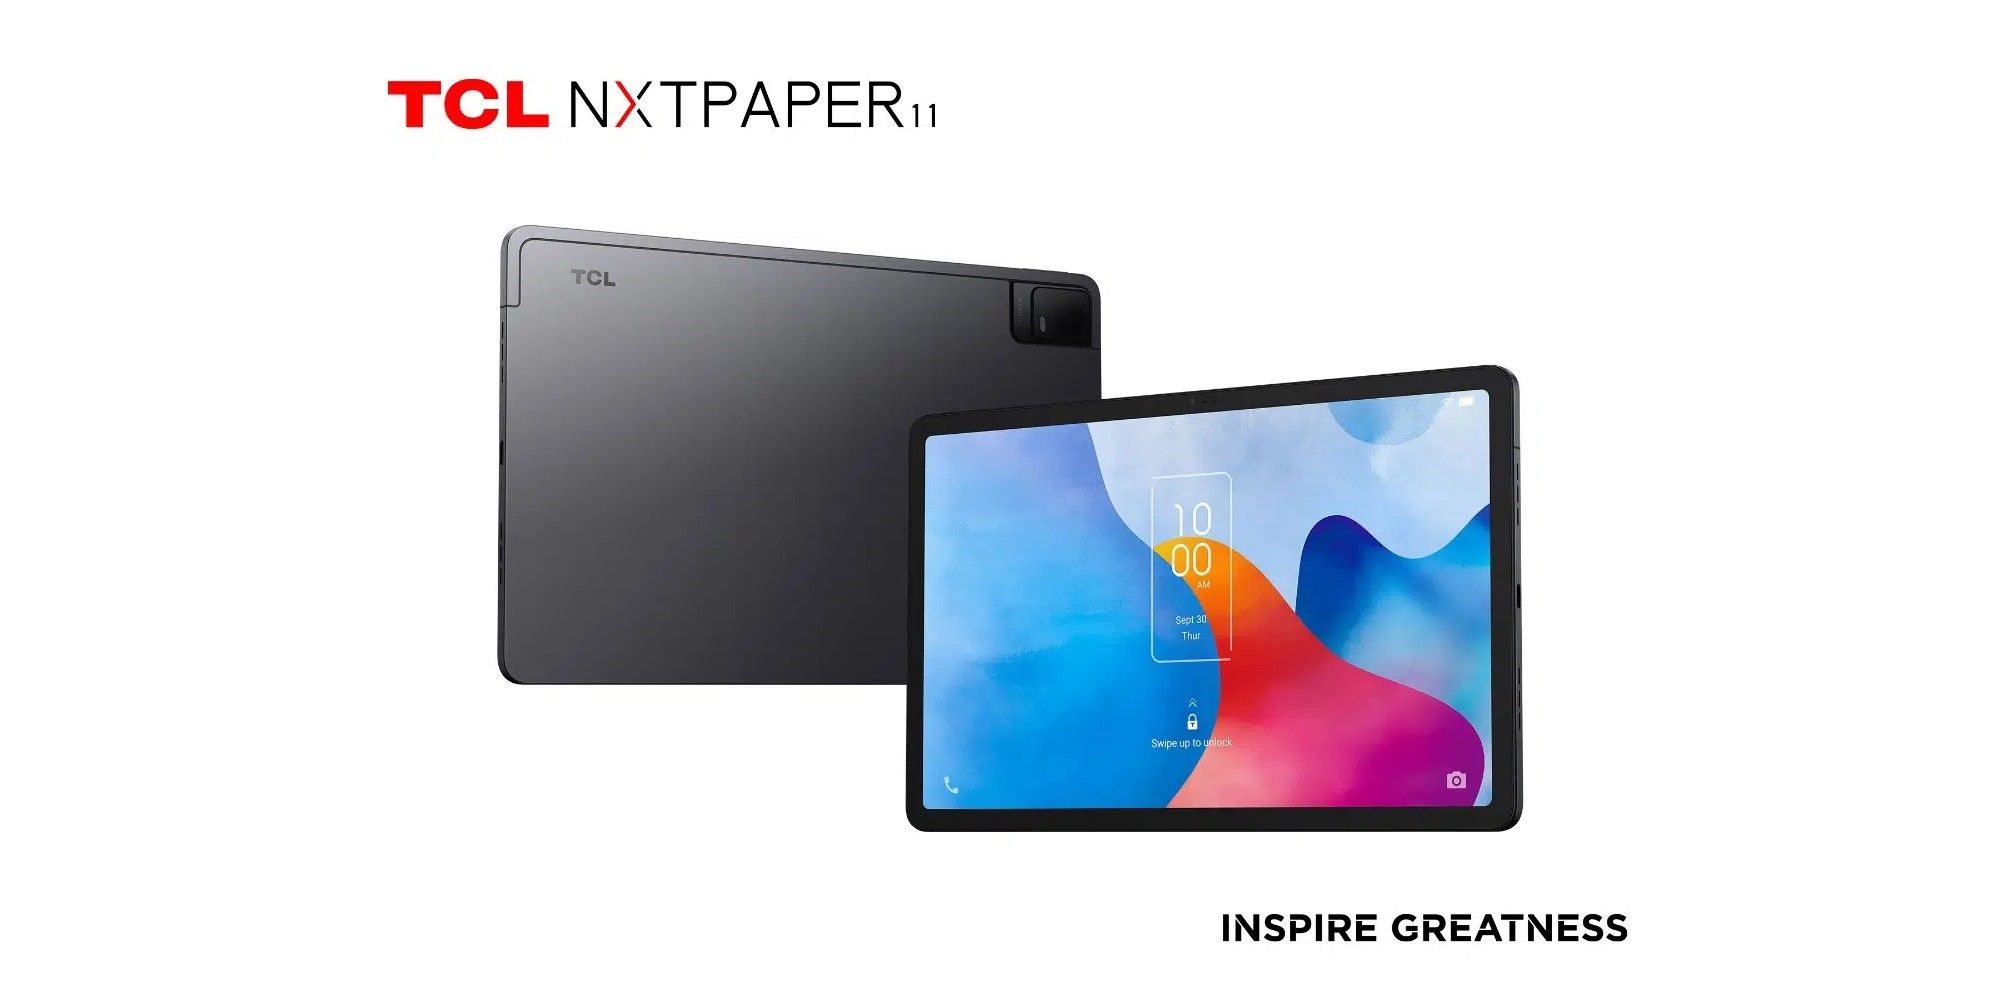 A photo showing the back and front of the TCL NXTPAPER 11